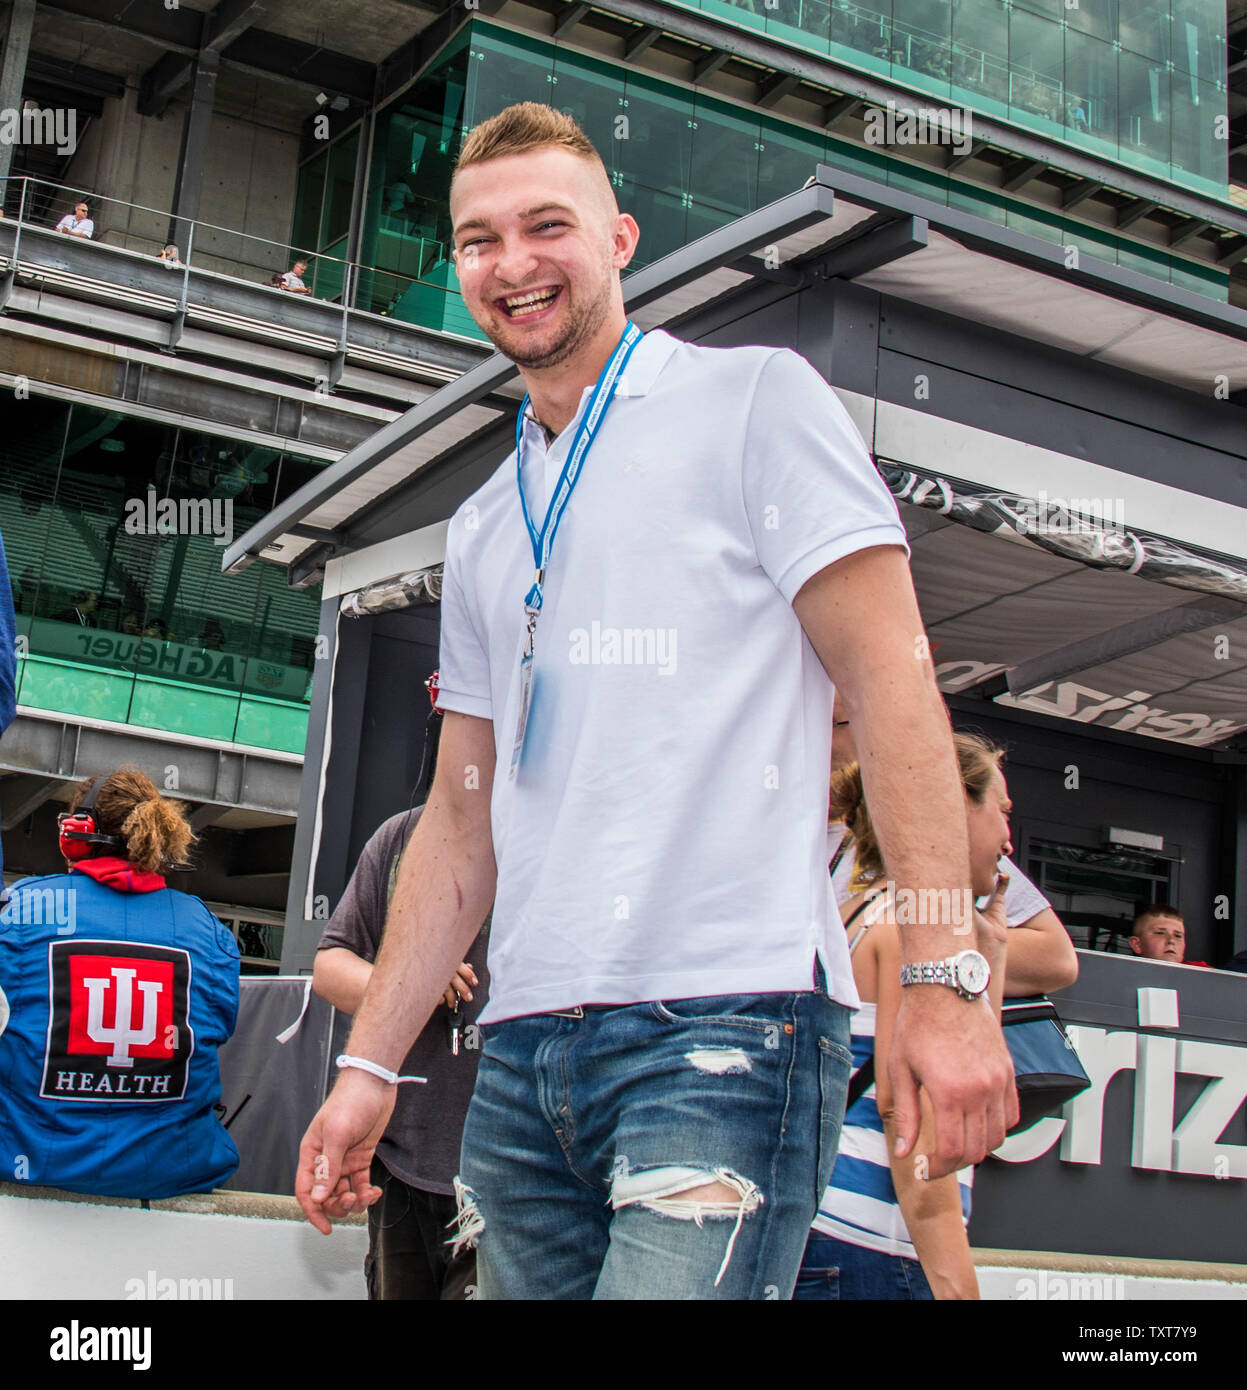 Indiana Pacer Forward Domatas Sabonis enjoys pre-race activities at the IndyCar Grand Prix at the Indianapolis Motor Speedway on May 12, 2018 in Indianapolis, Indiana. Photo by Edwin Locke/UPI Stock Photo